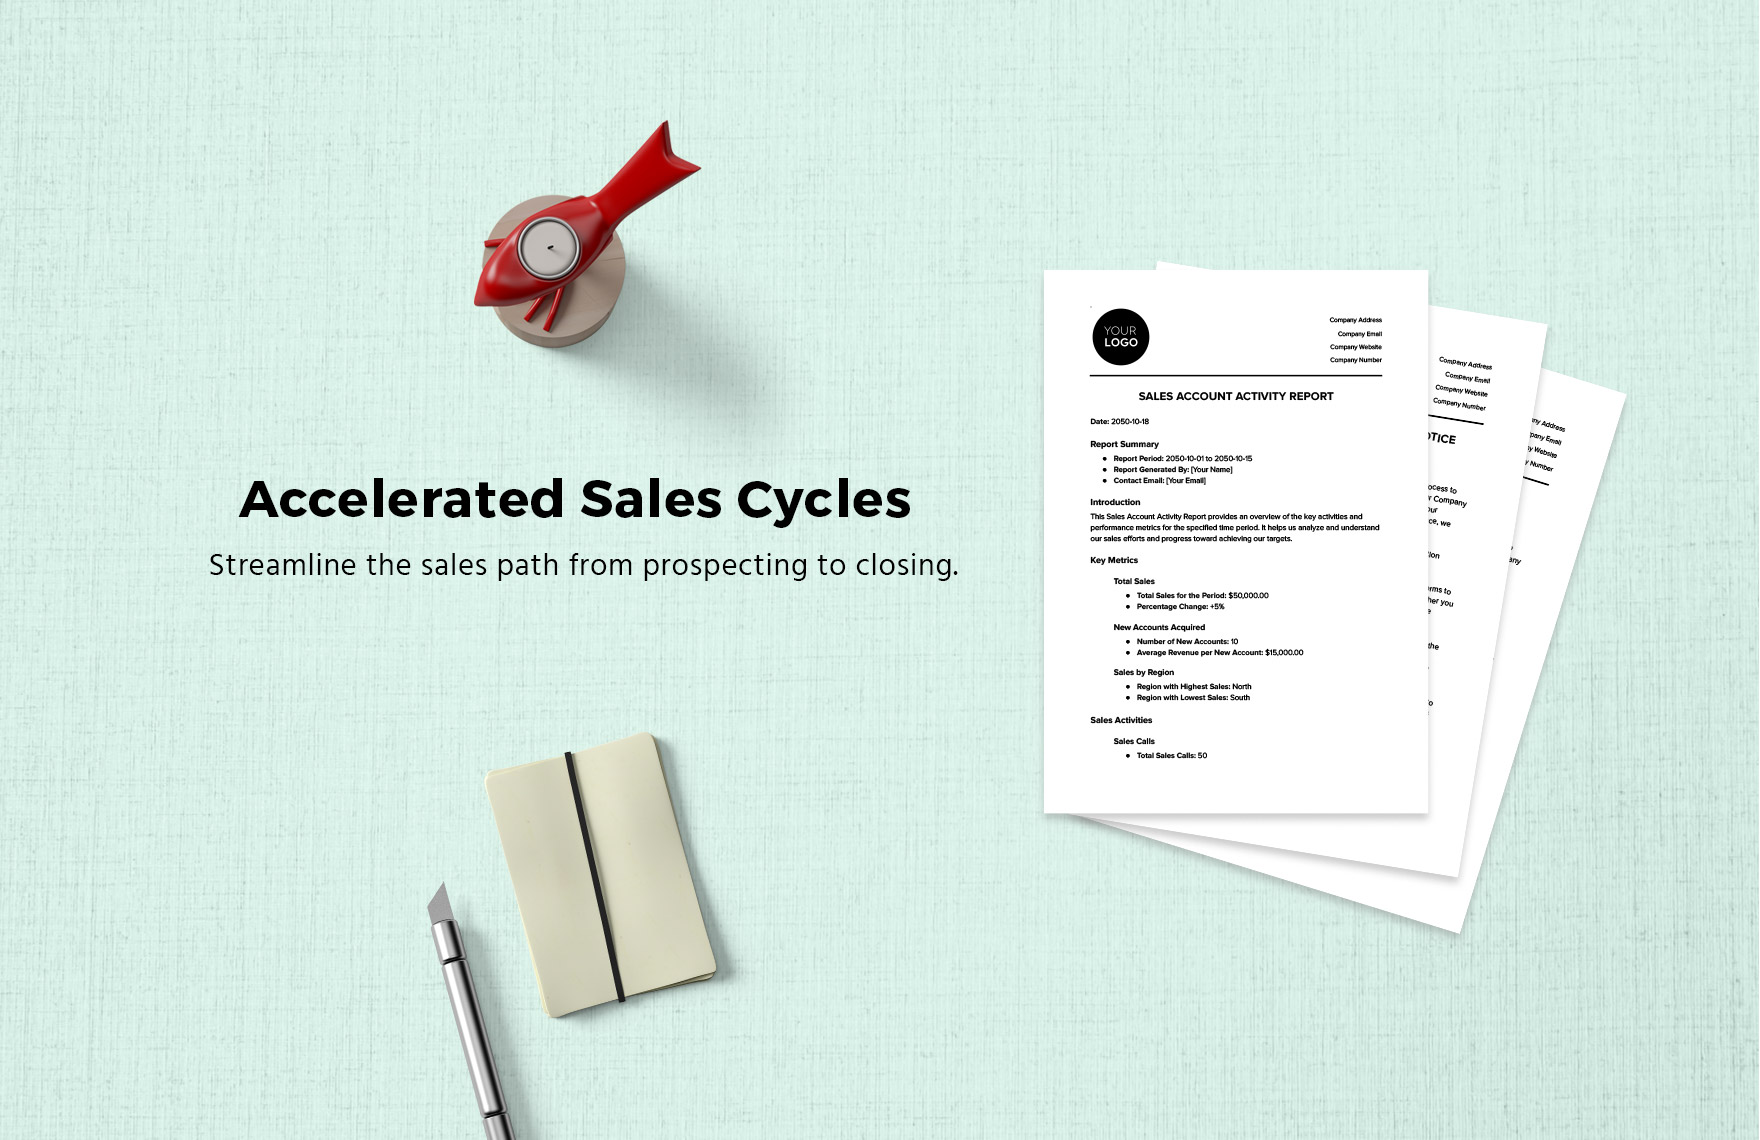 Sales Account Activity Report Template